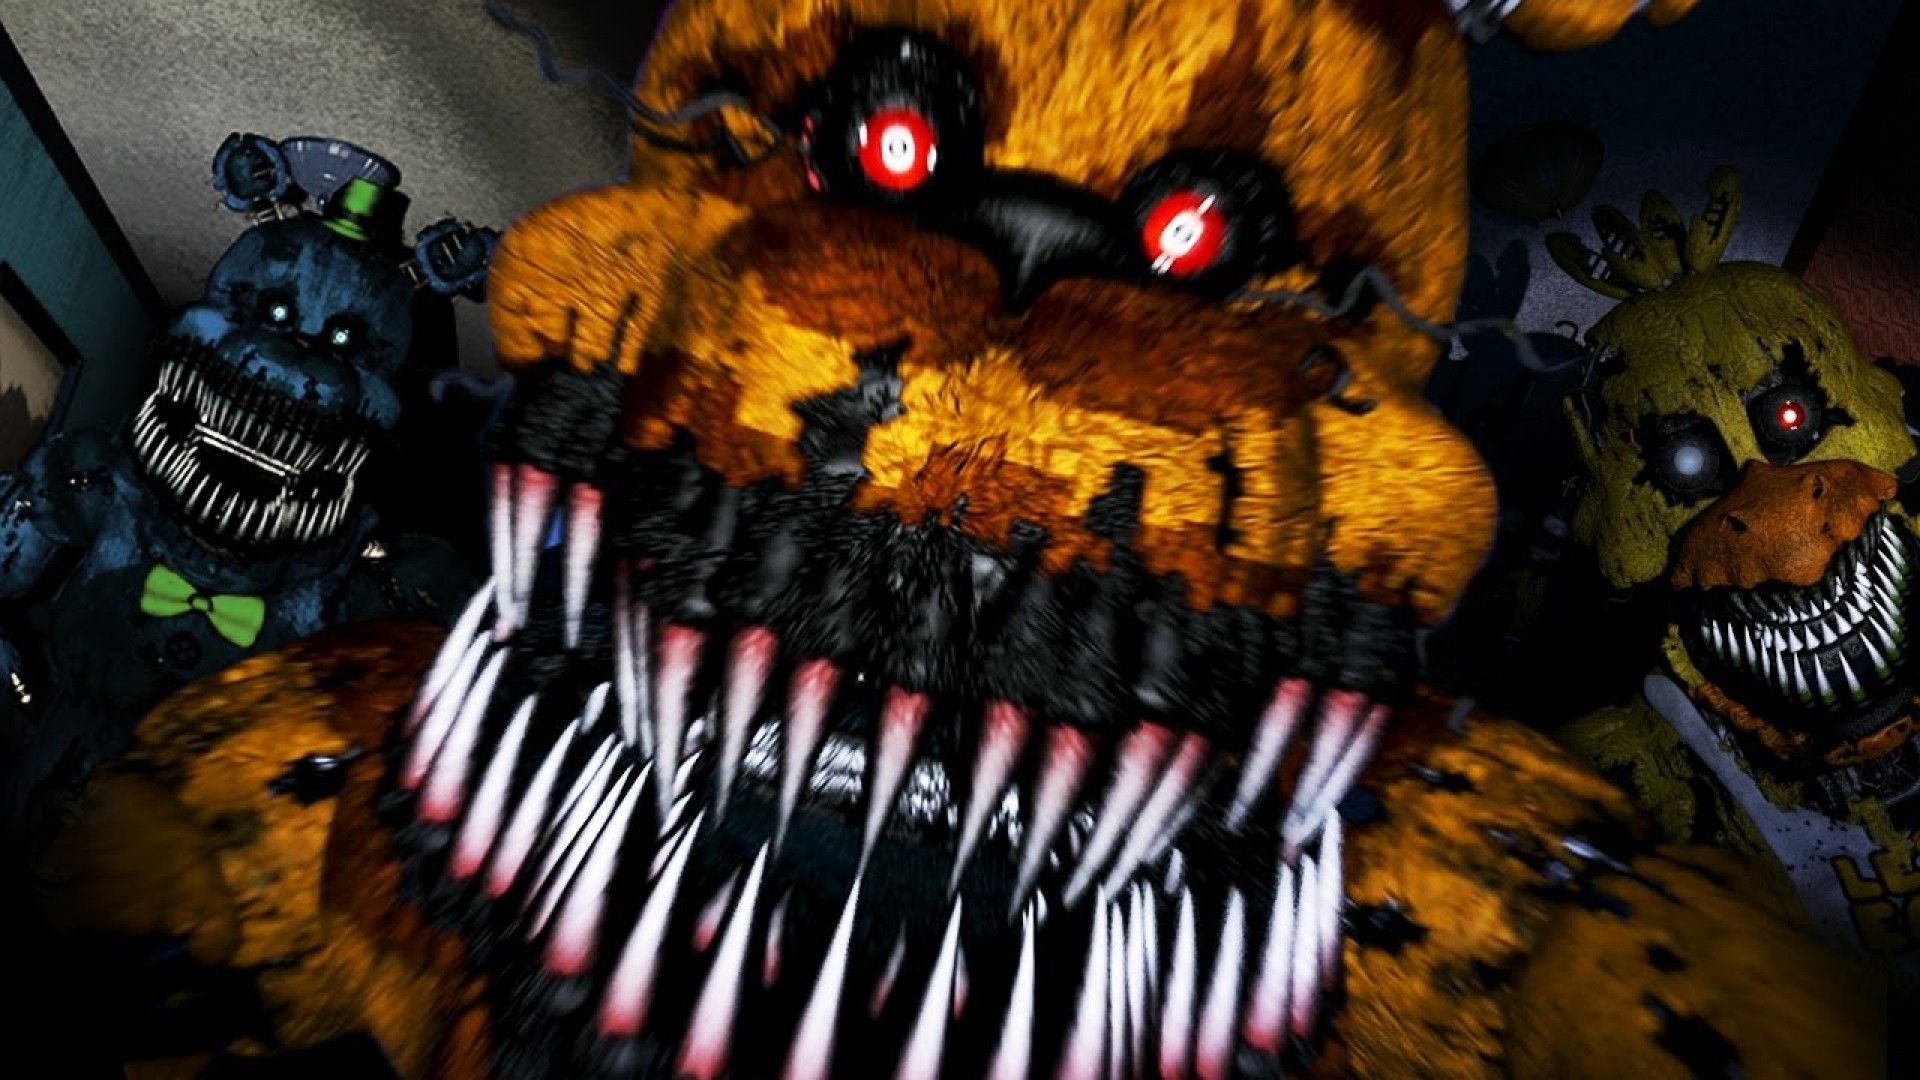 Five Nights At Freddy's Wallpaper background picture